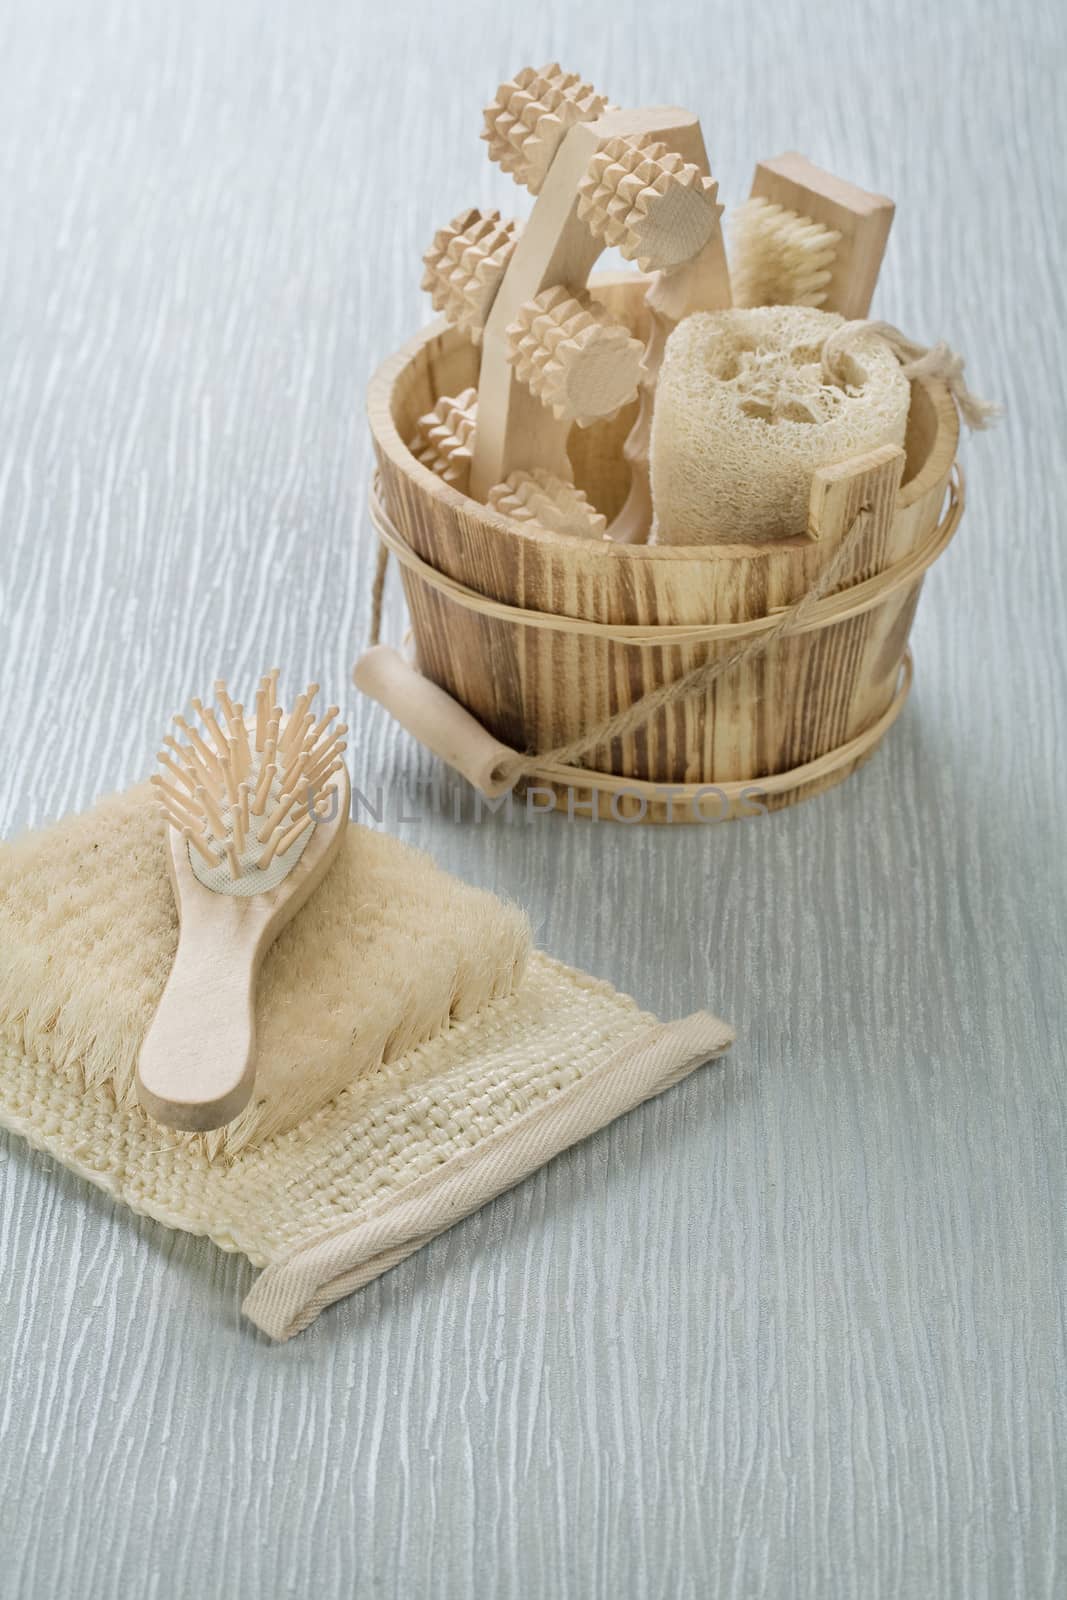 hairbrush on bast with wooden bucket by mihalec